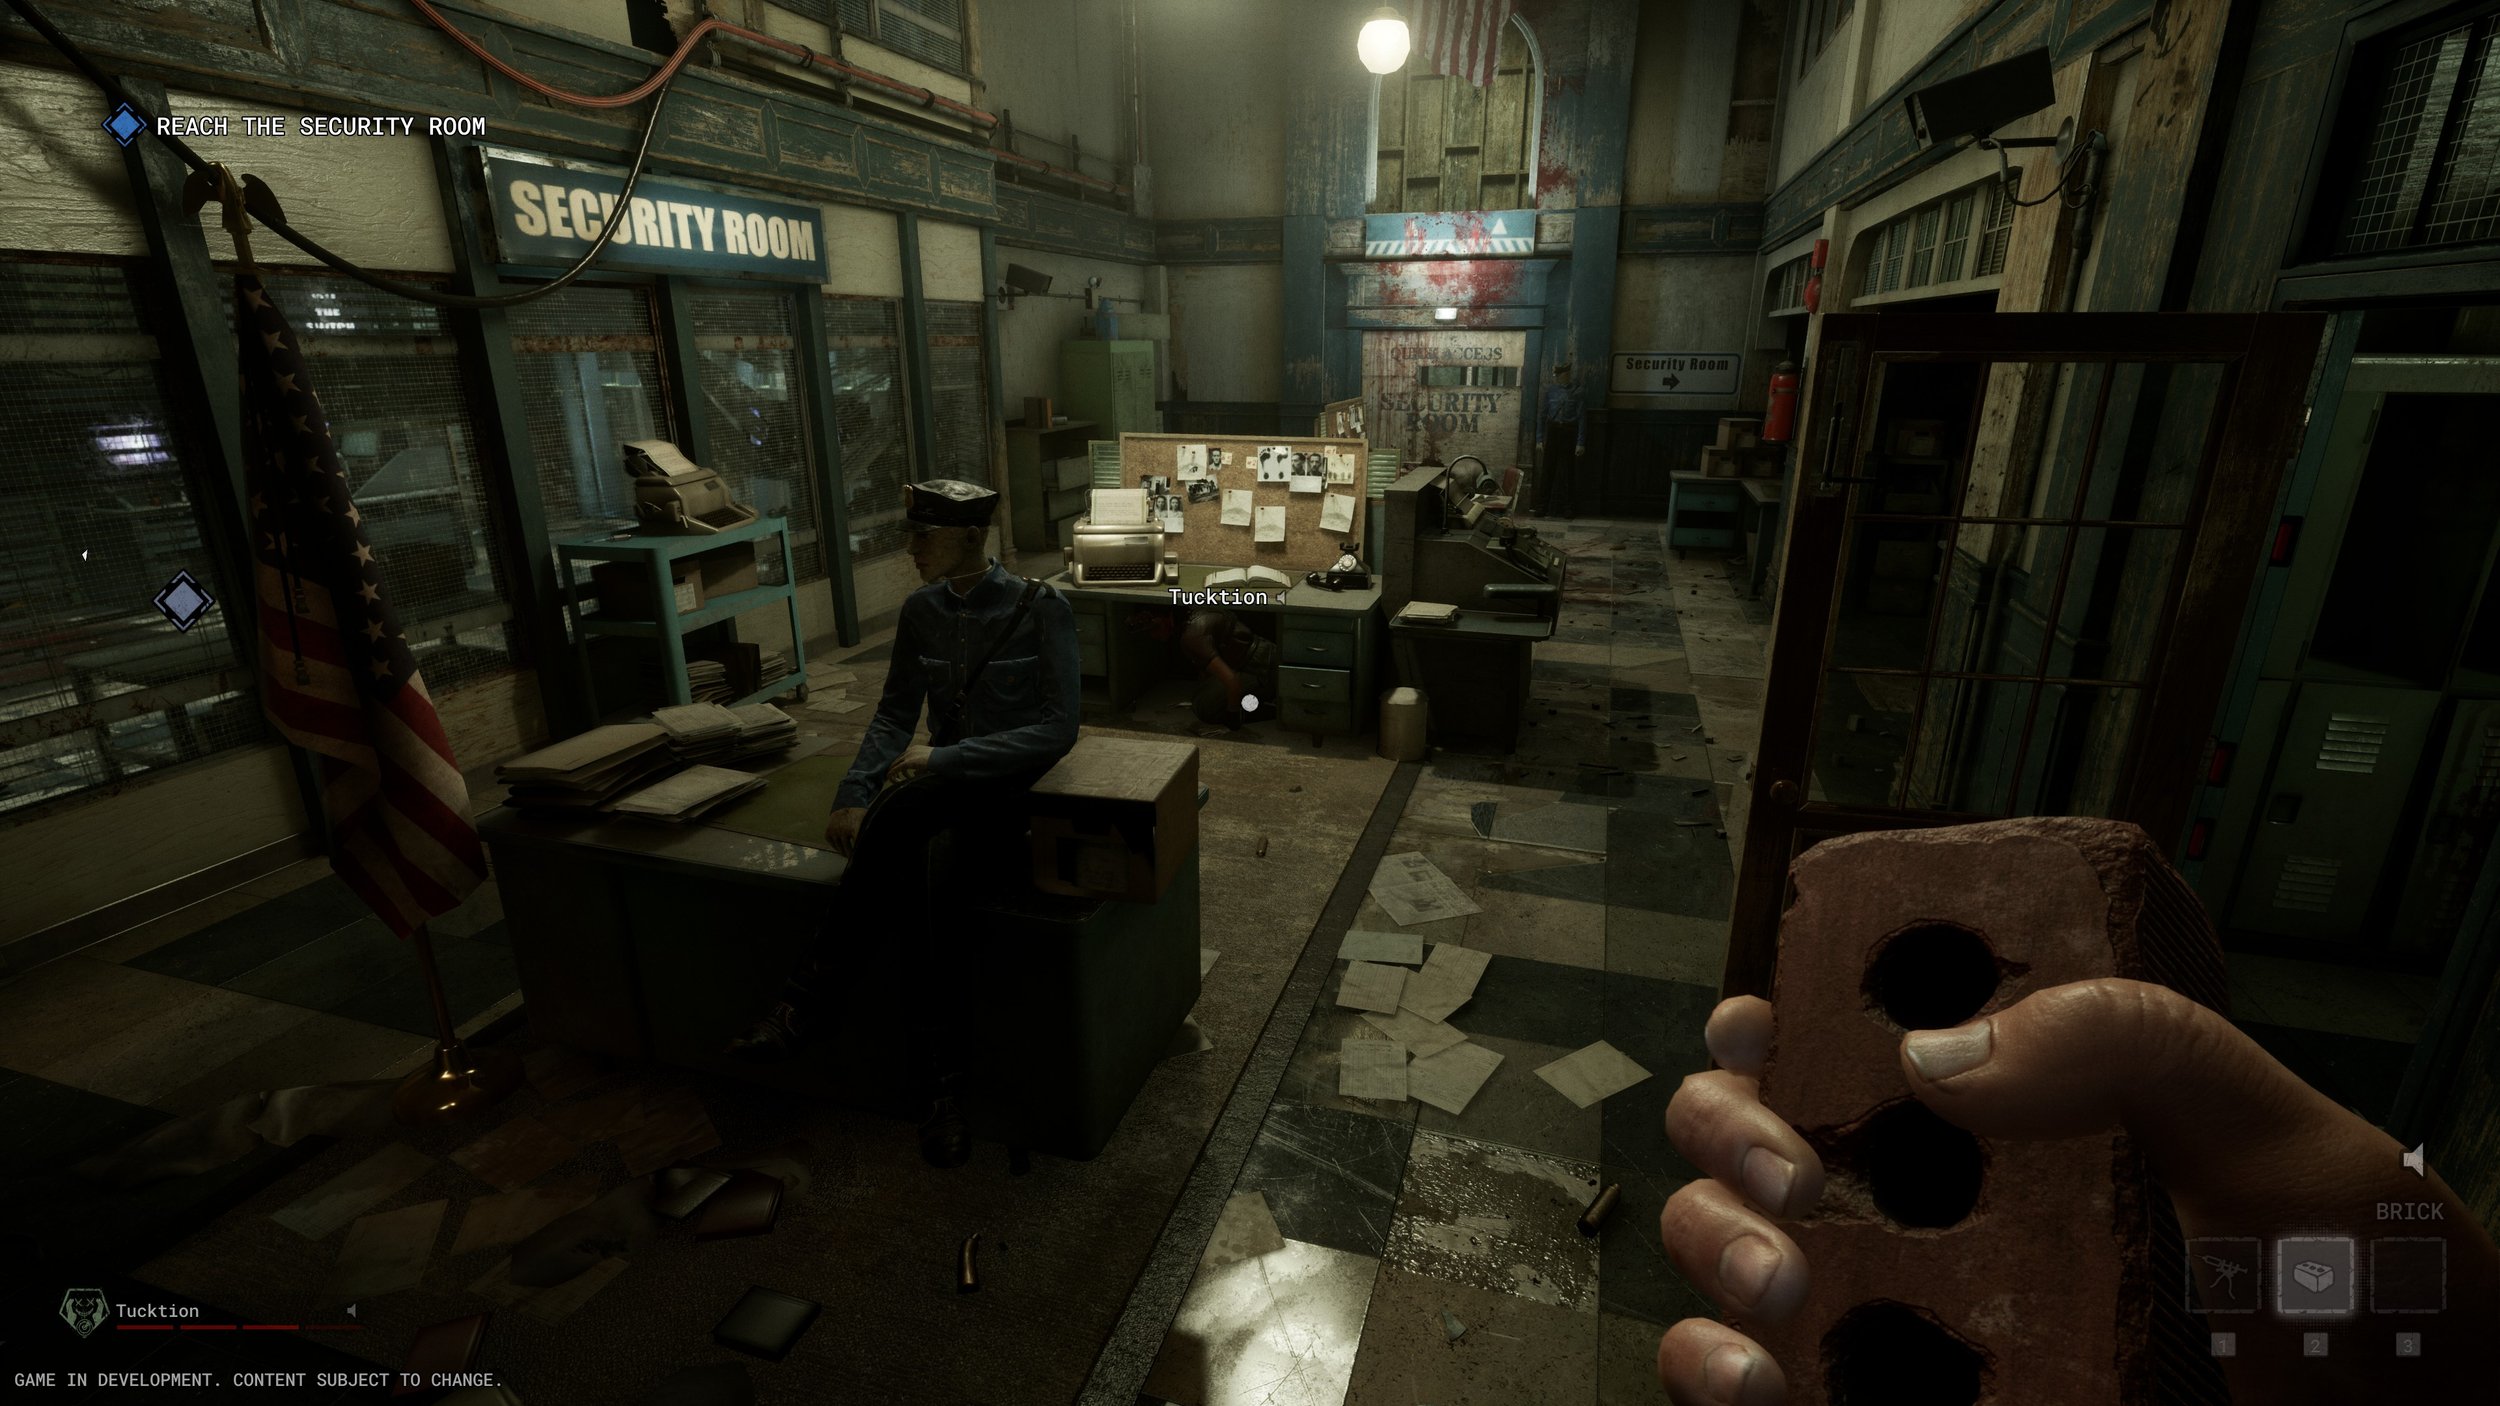 The Outlast Trials Reveals Plans For Major Halloween Update